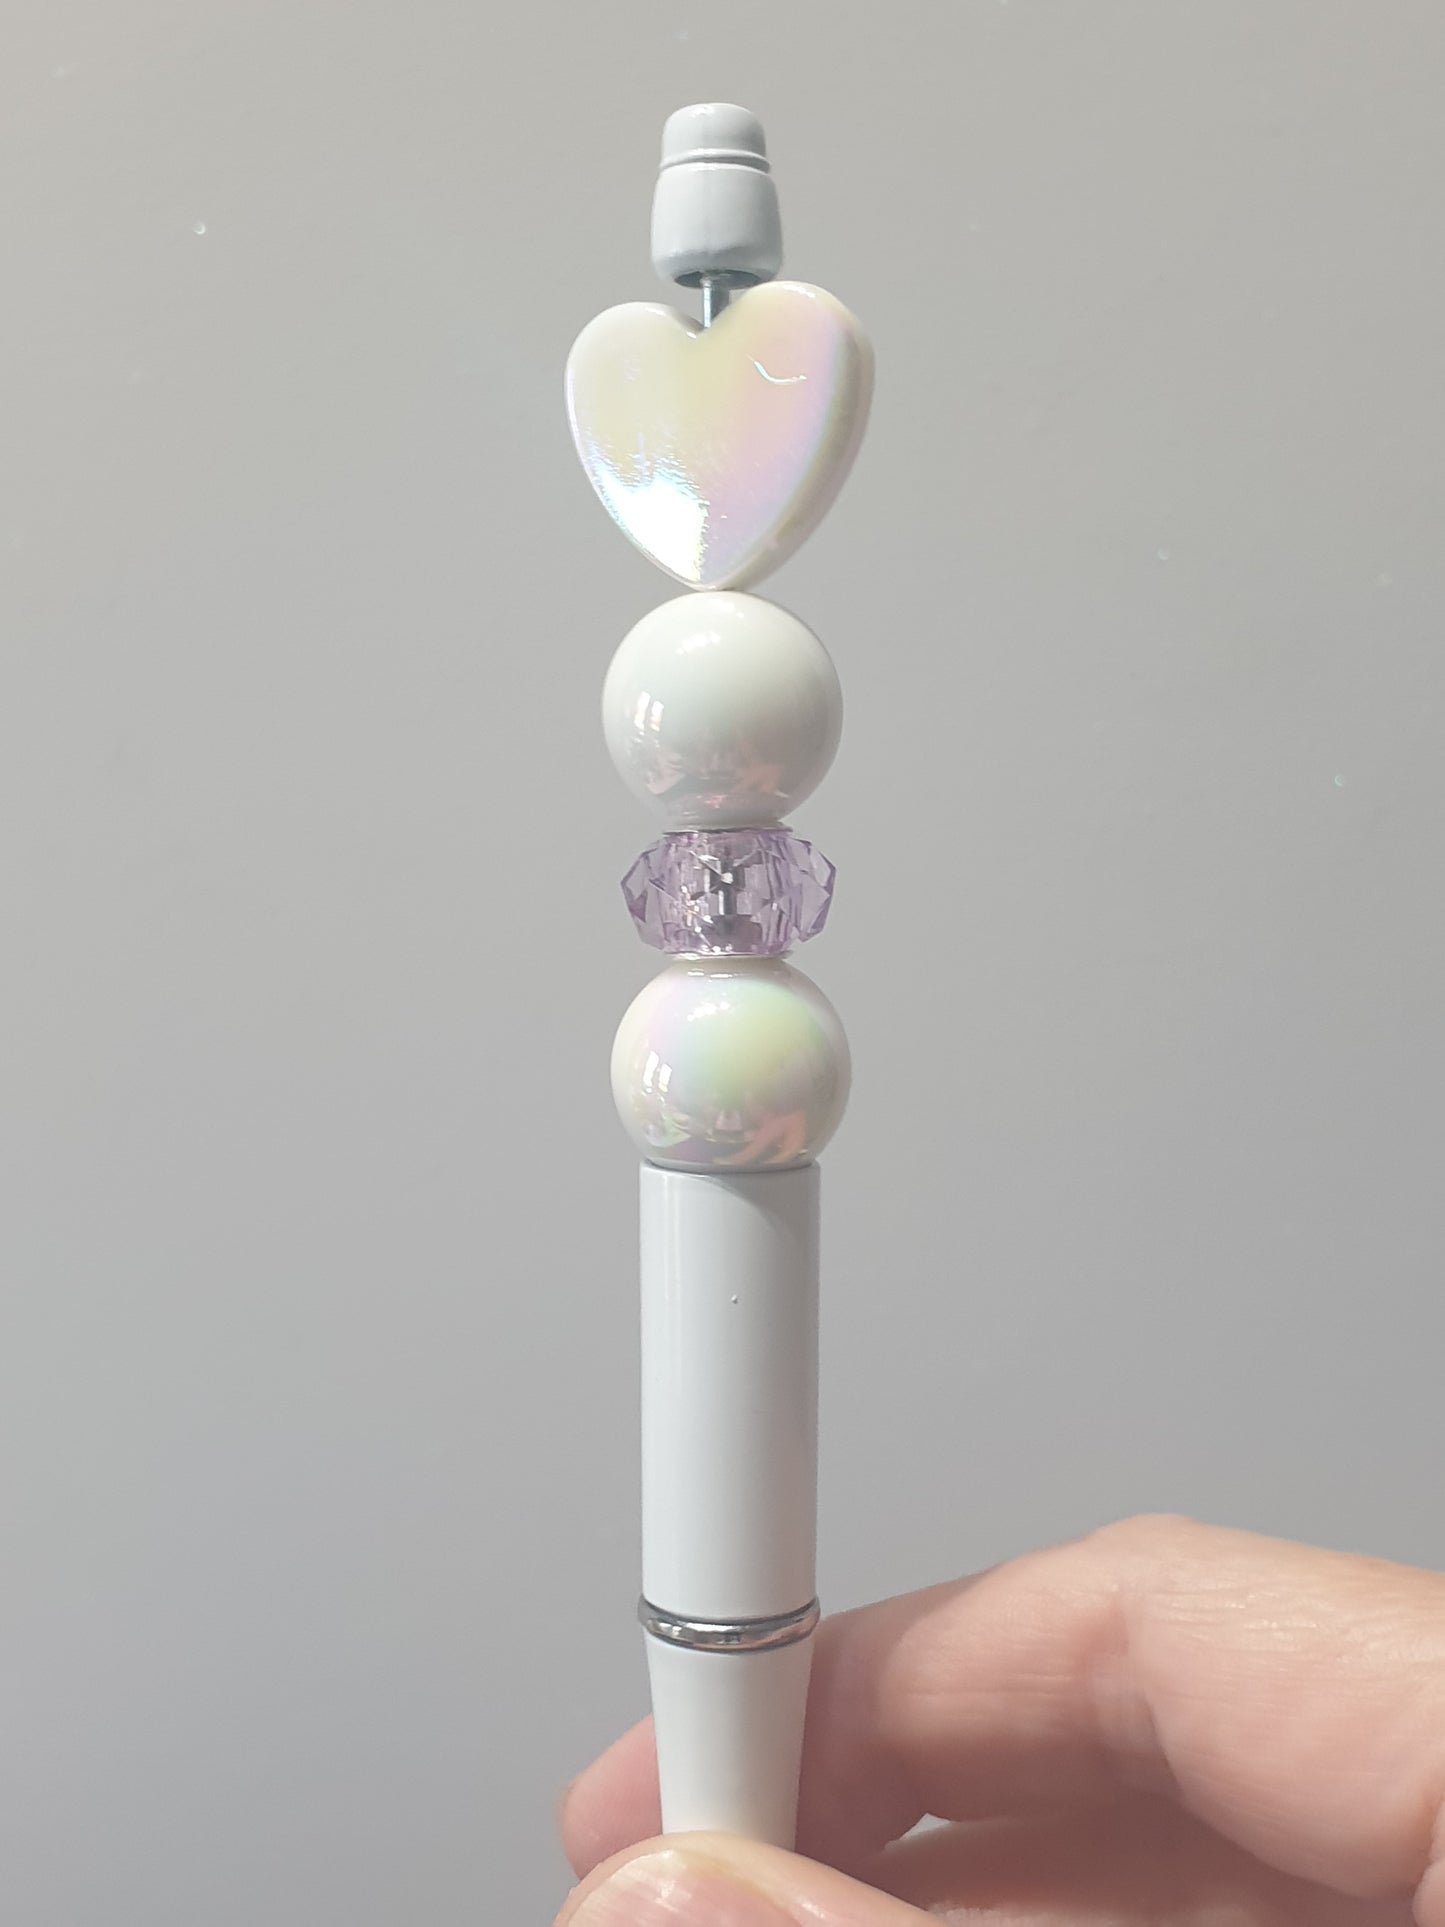 Round 16mm white, pink and red. Very shiny with rainbow shimmer. Fit on Pen